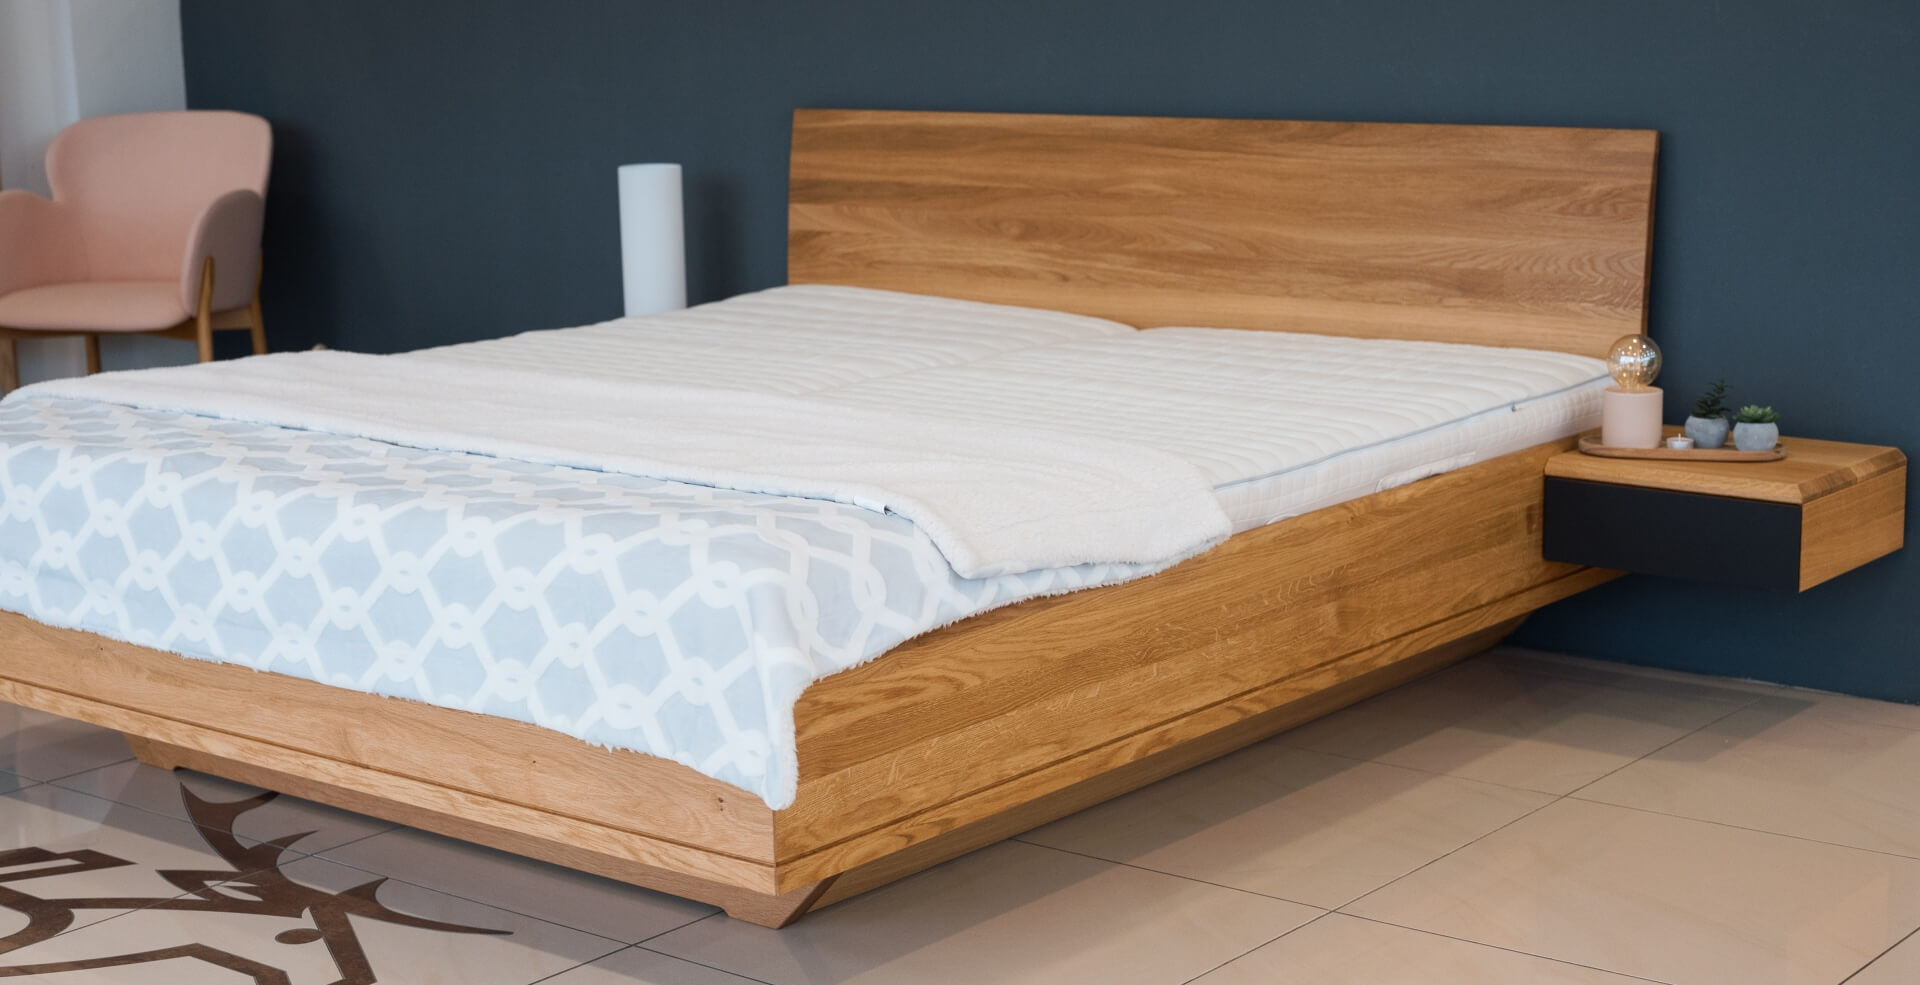 Is one partner double mattress or two single mattresses better?